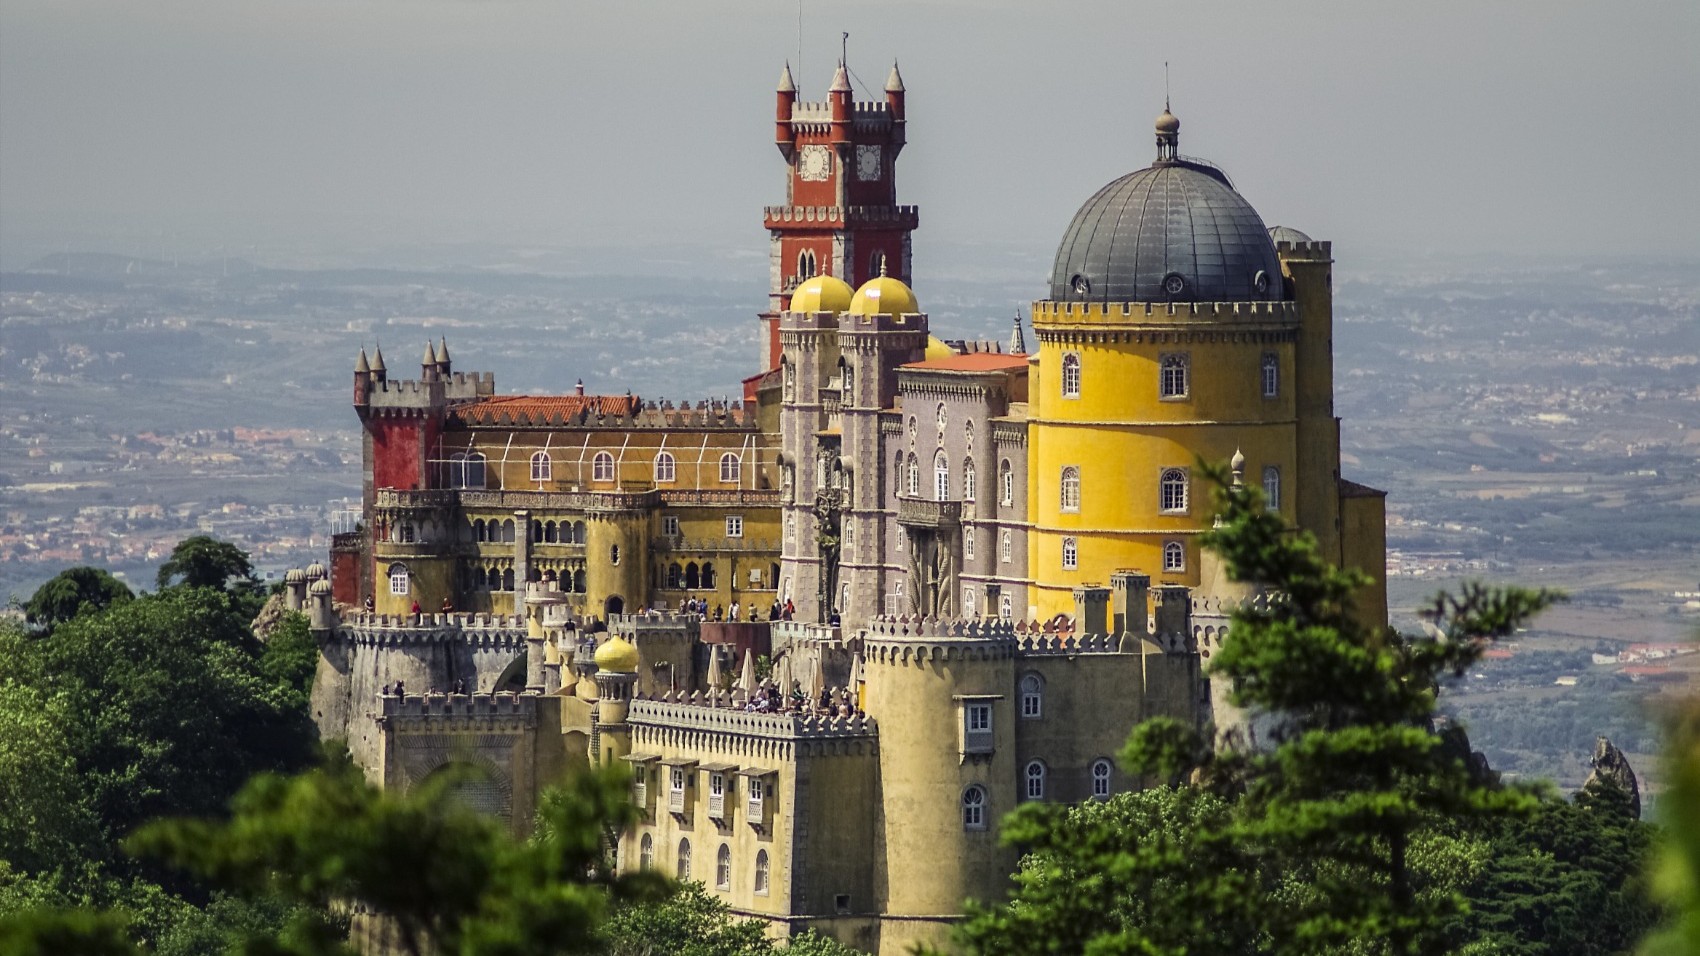 Sintra-Classic-with-Sidecar-sintra-pena-palace